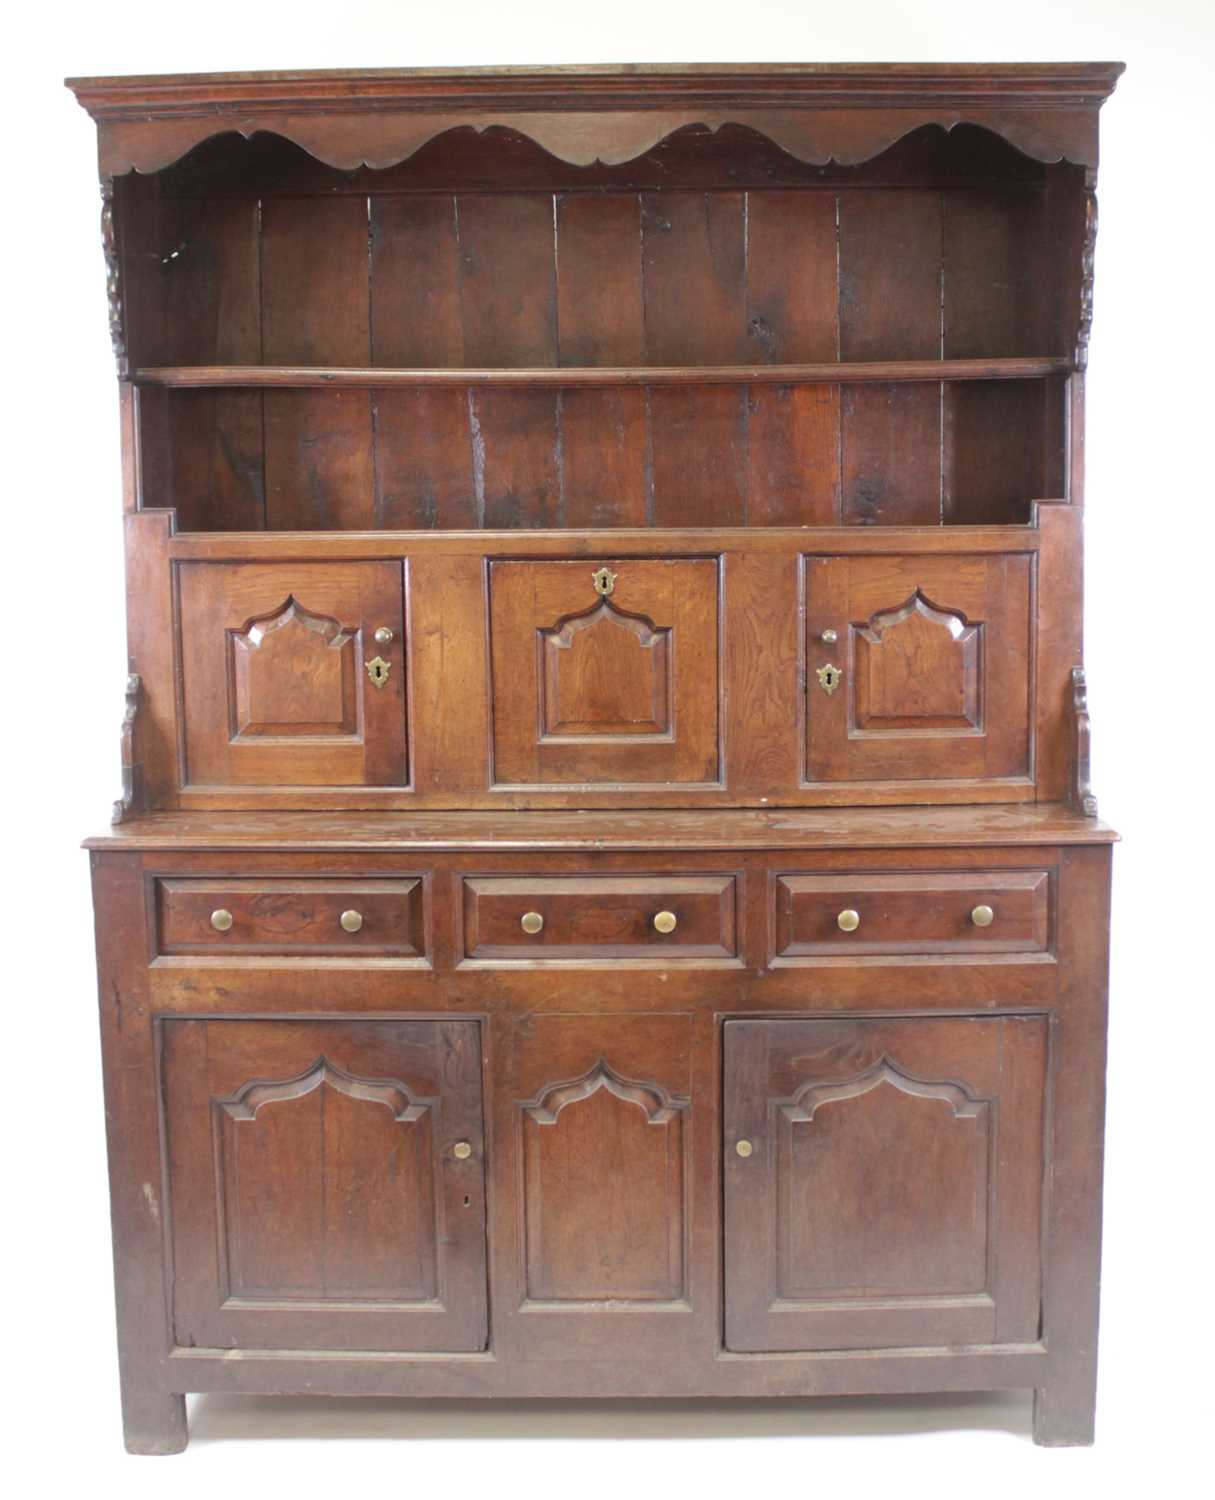 A George III joined oak dresser, the upper section having a wavy frieze and two shelves above